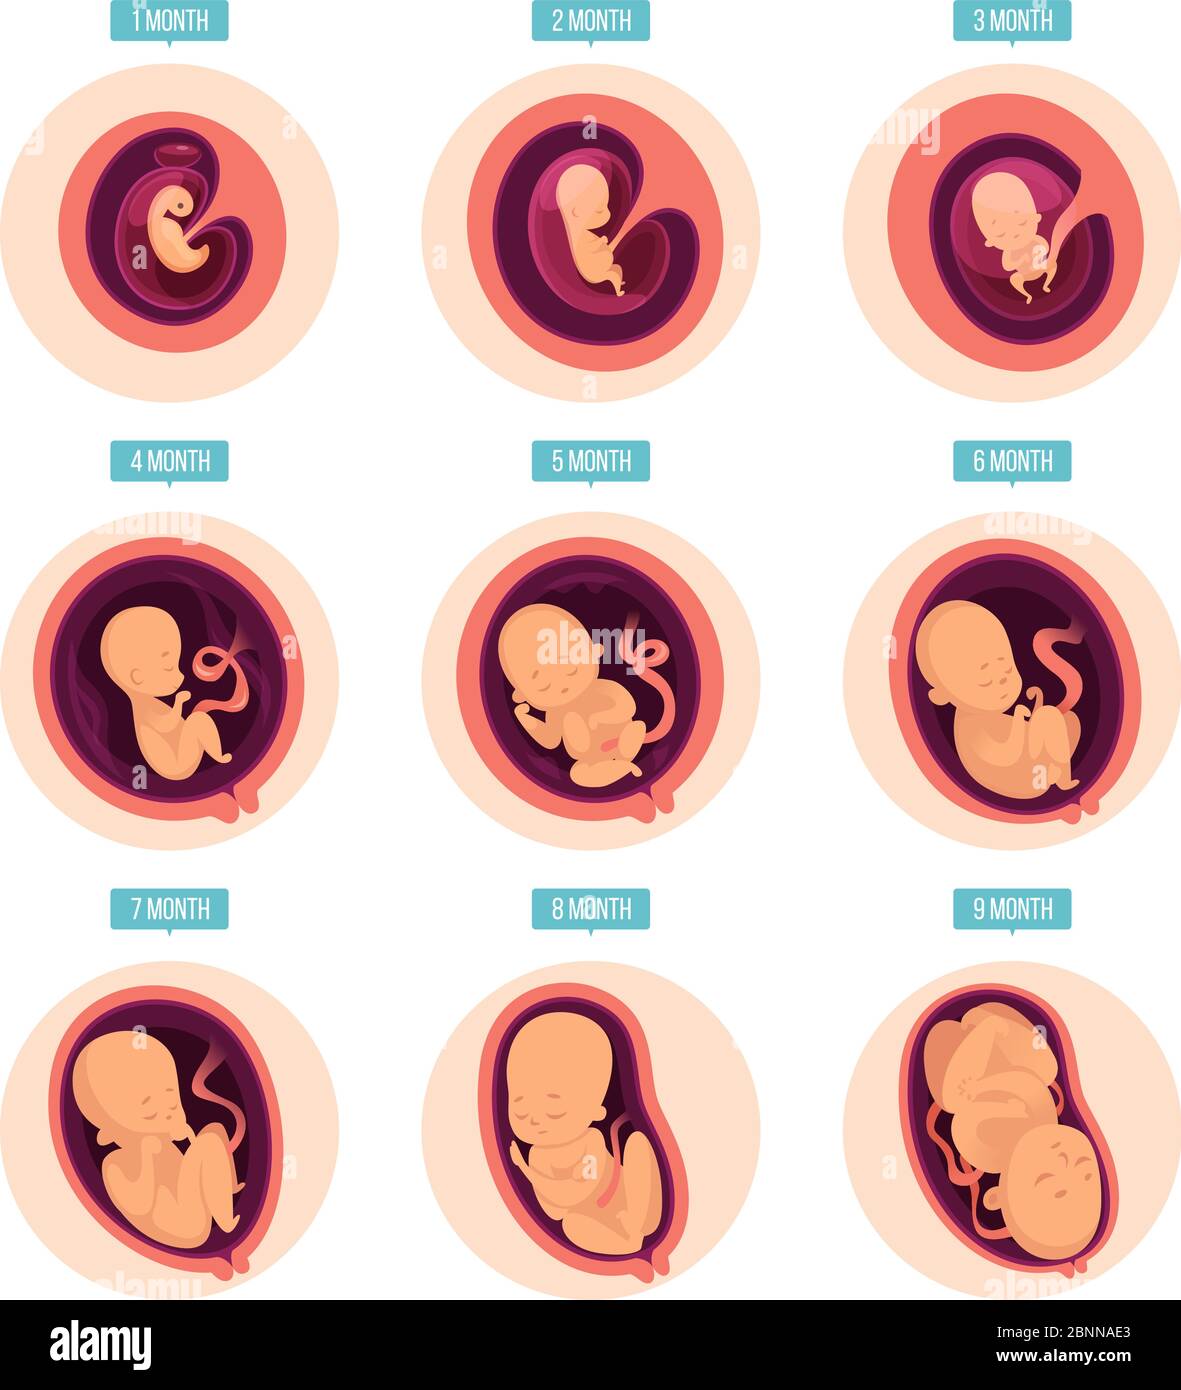 Pregnancy stages. Human growth stages embryo development egg fertility pregnancy stages vector infographic pictures Stock Vector